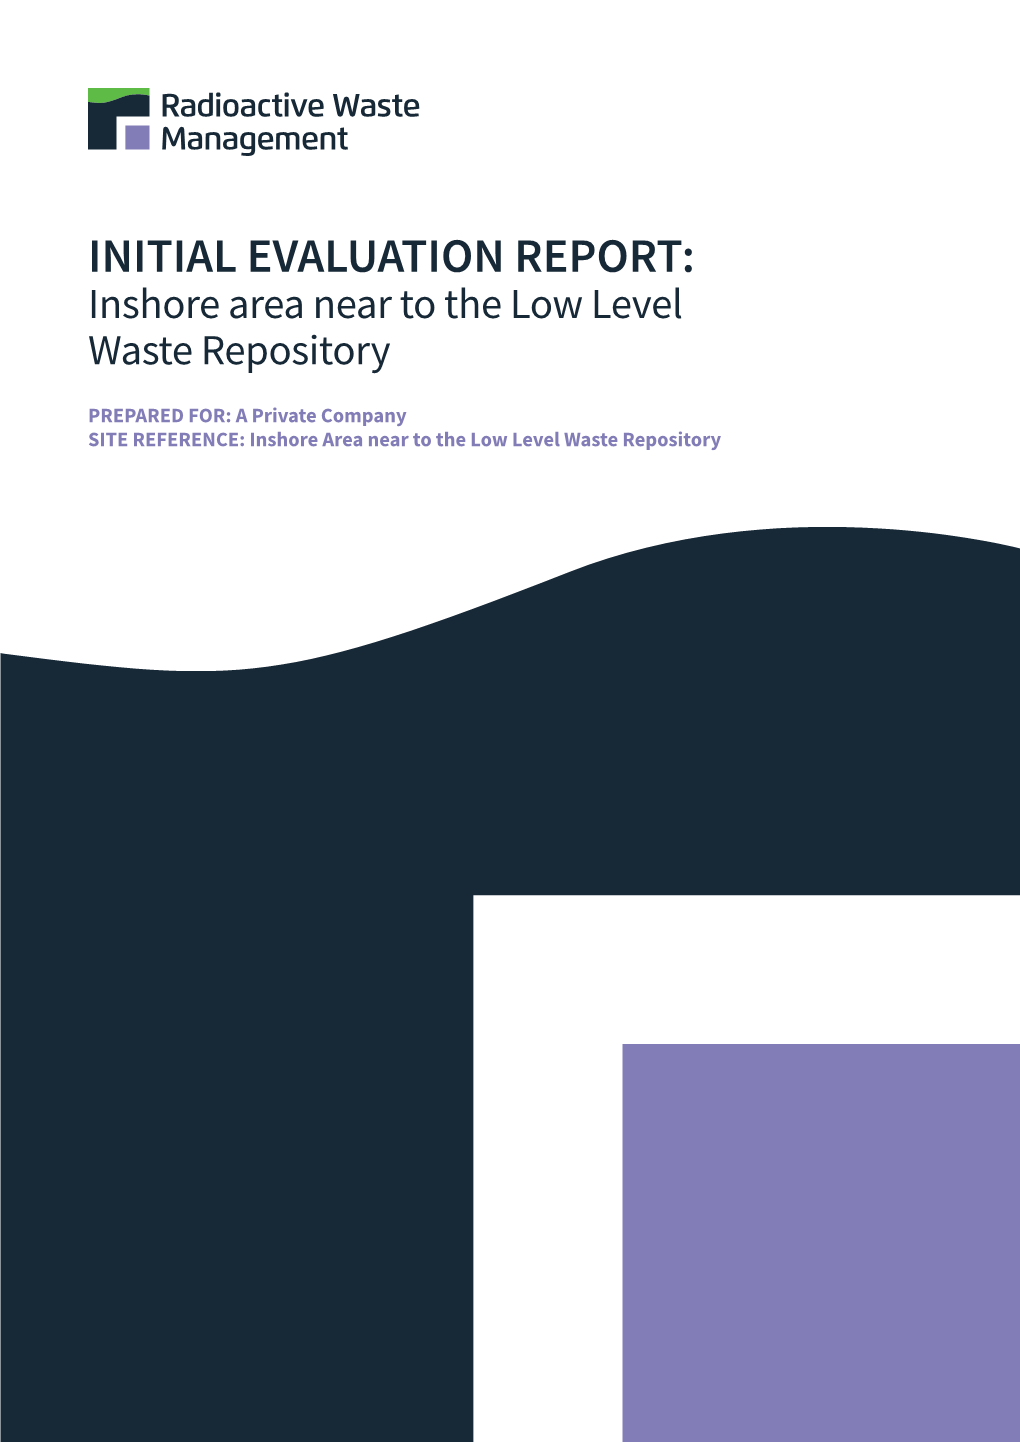 INITIAL EVALUATION REPORT: Inshore Area Near to the Low Level Waste Repository